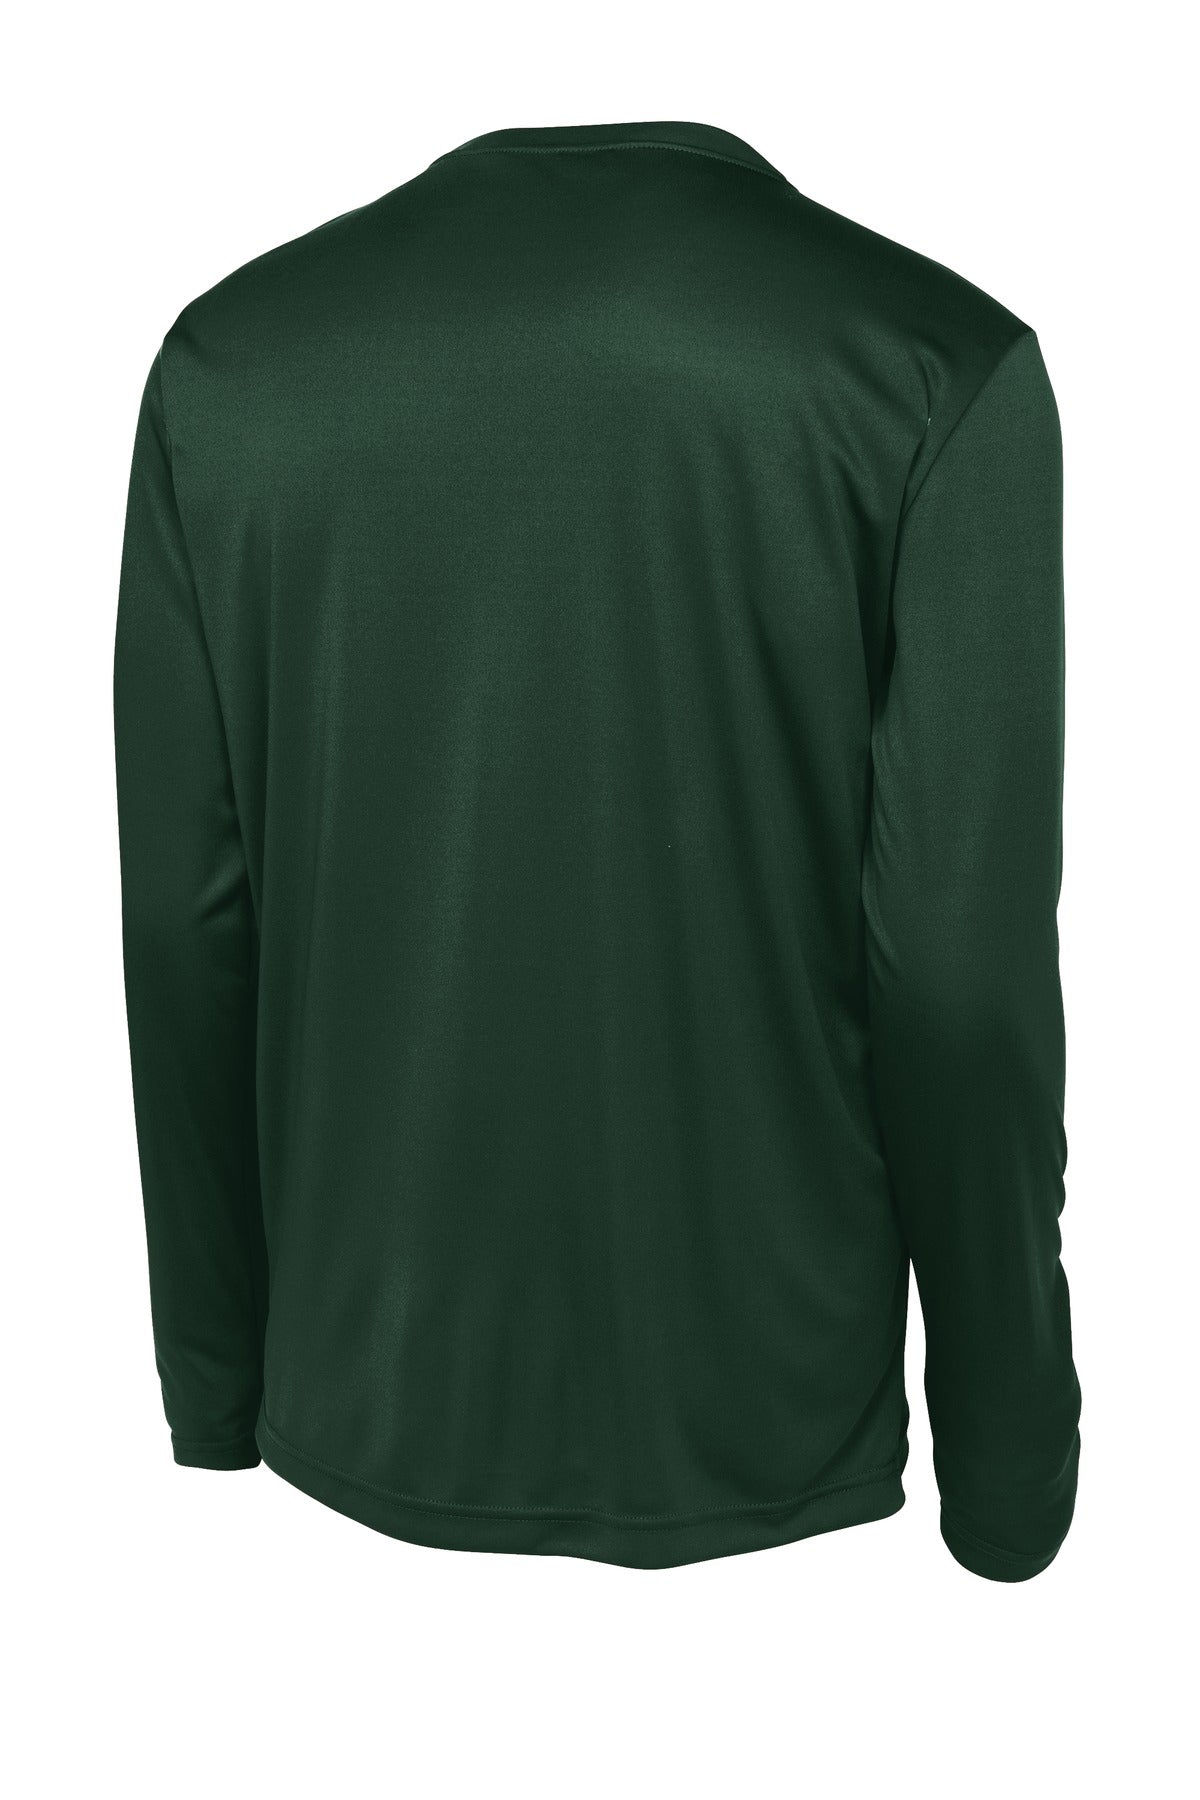 Sport-Tek Youth Long Sleeve PosiCharge Competitor Tee. YST350LS - BT Imprintables Shirts